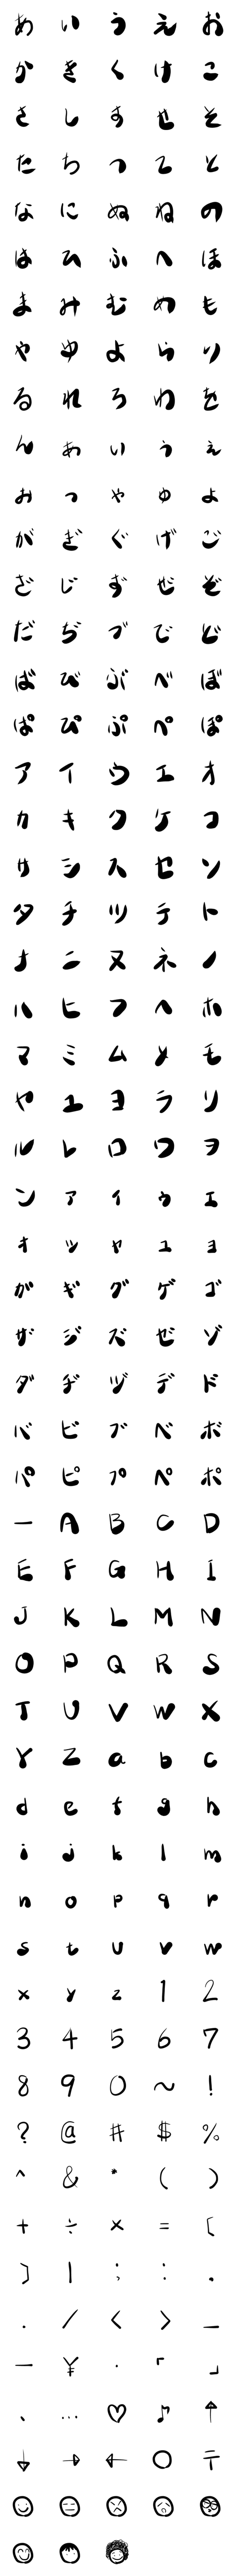 [LINE絵文字]Handwritten charactersの画像一覧